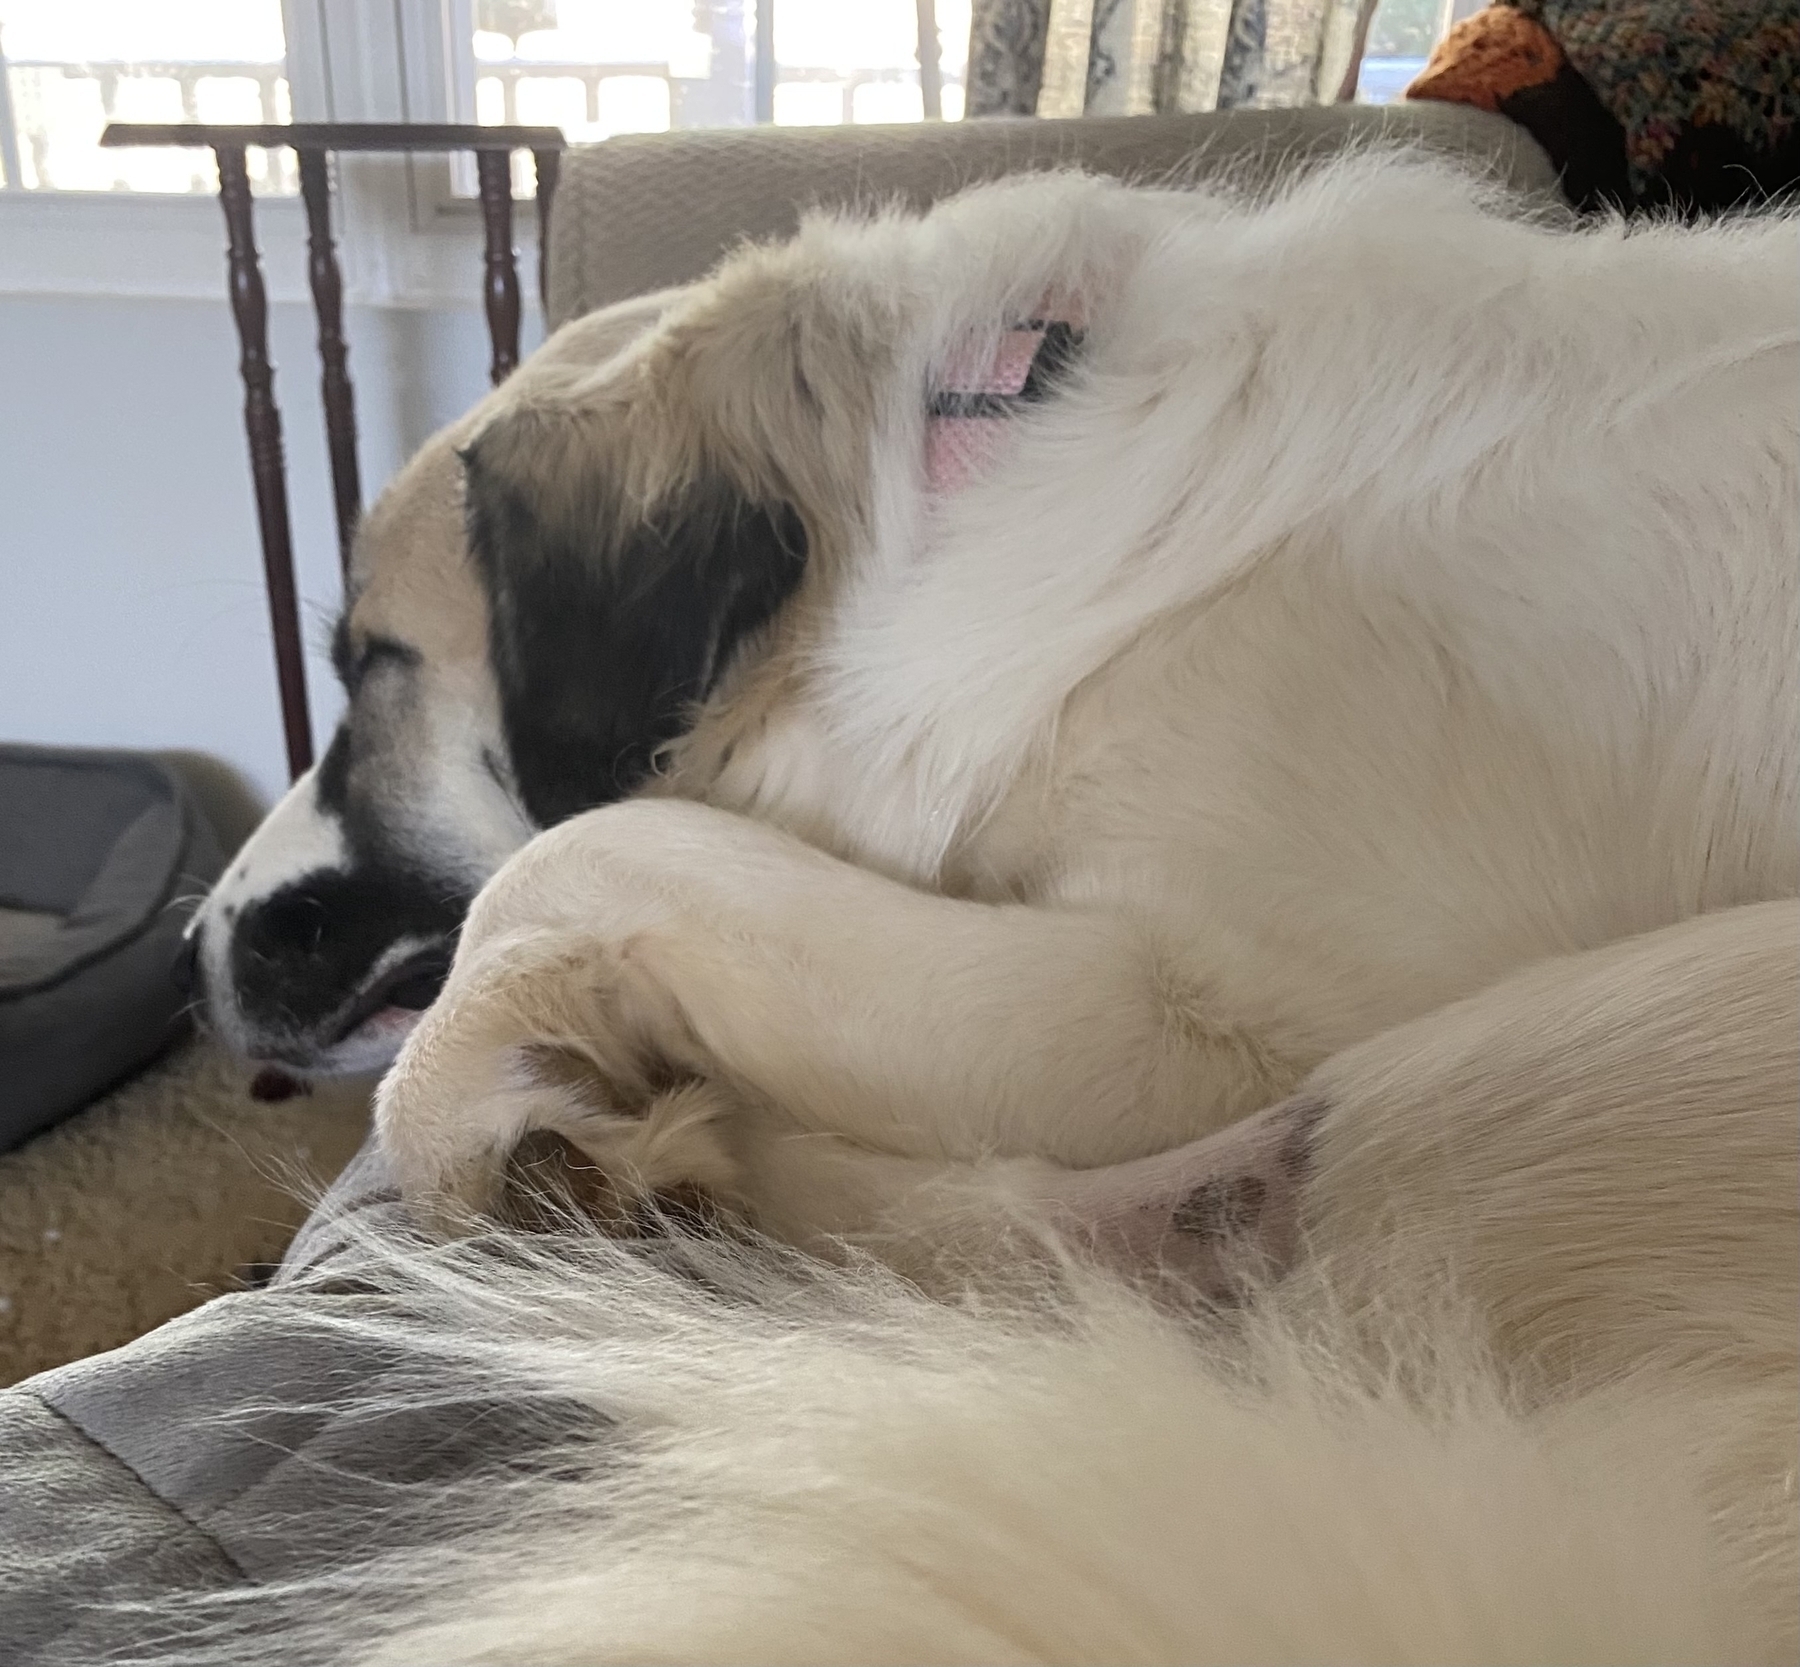 Our little 90lb. Great Pyrenees girl Ms. Gracie sleeping.